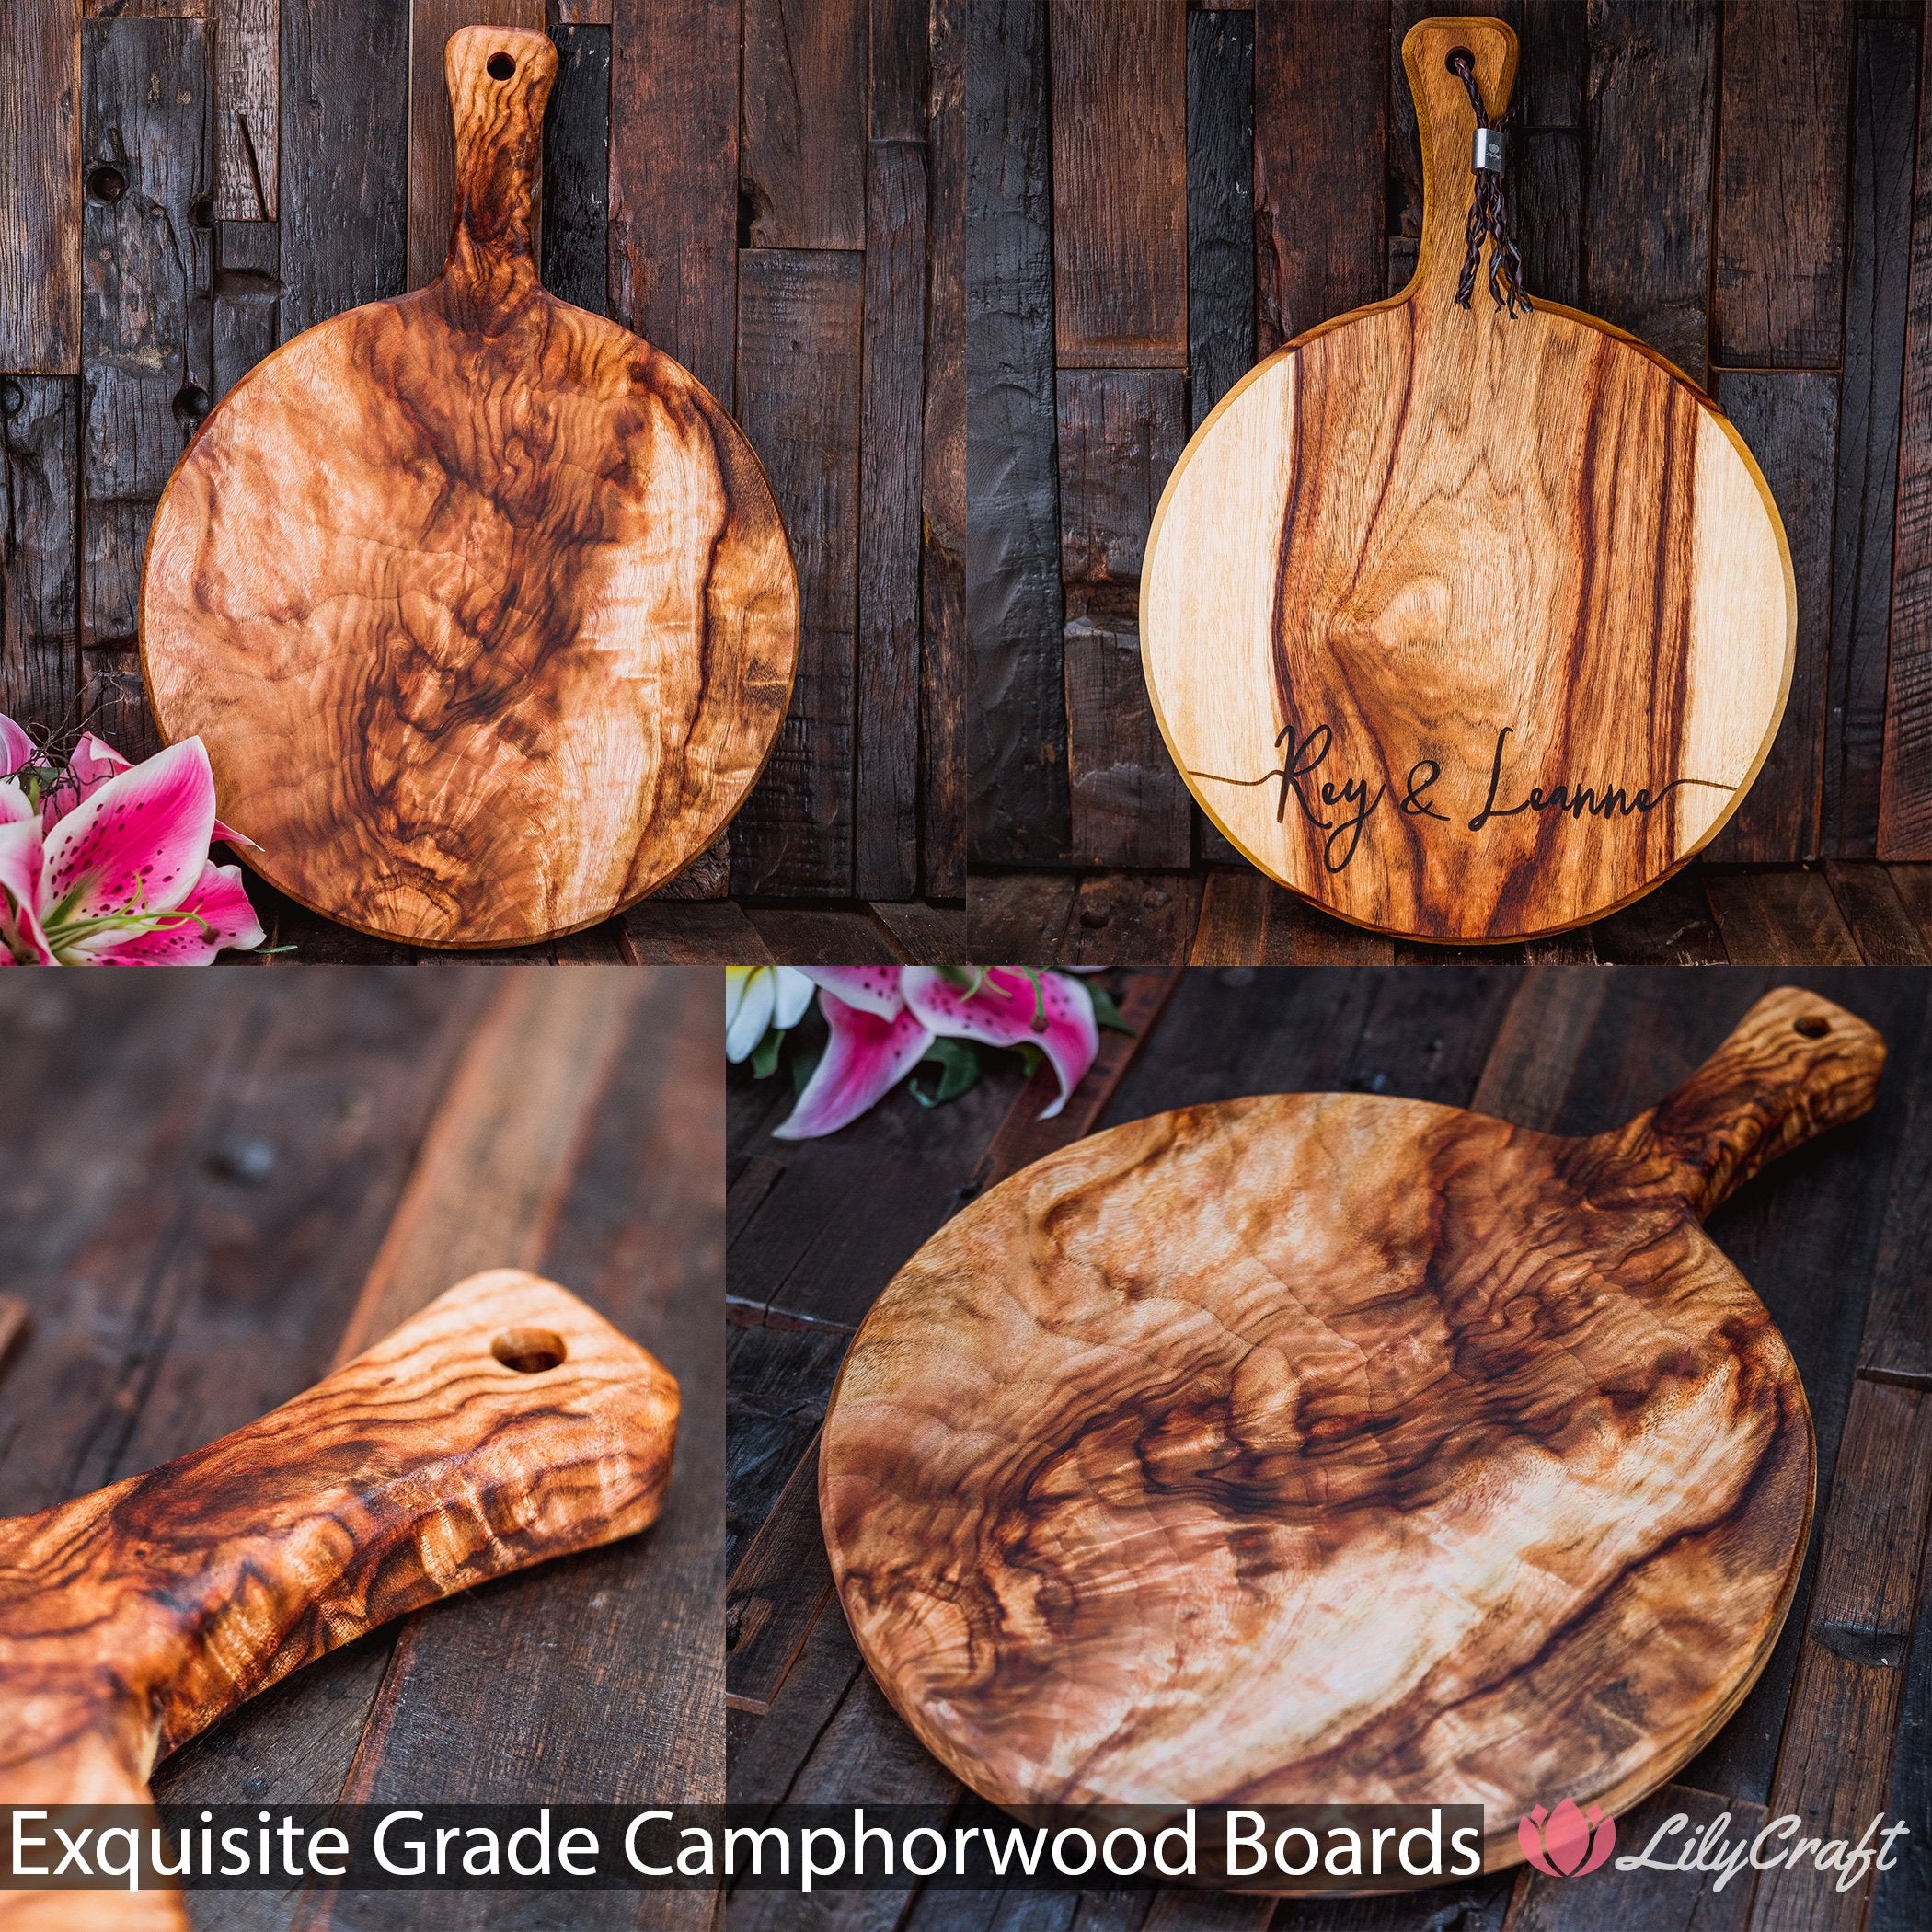 Exquisite Cheese Boards Most Beautiful Cheese Board Best Cheese Boards LilyCraft